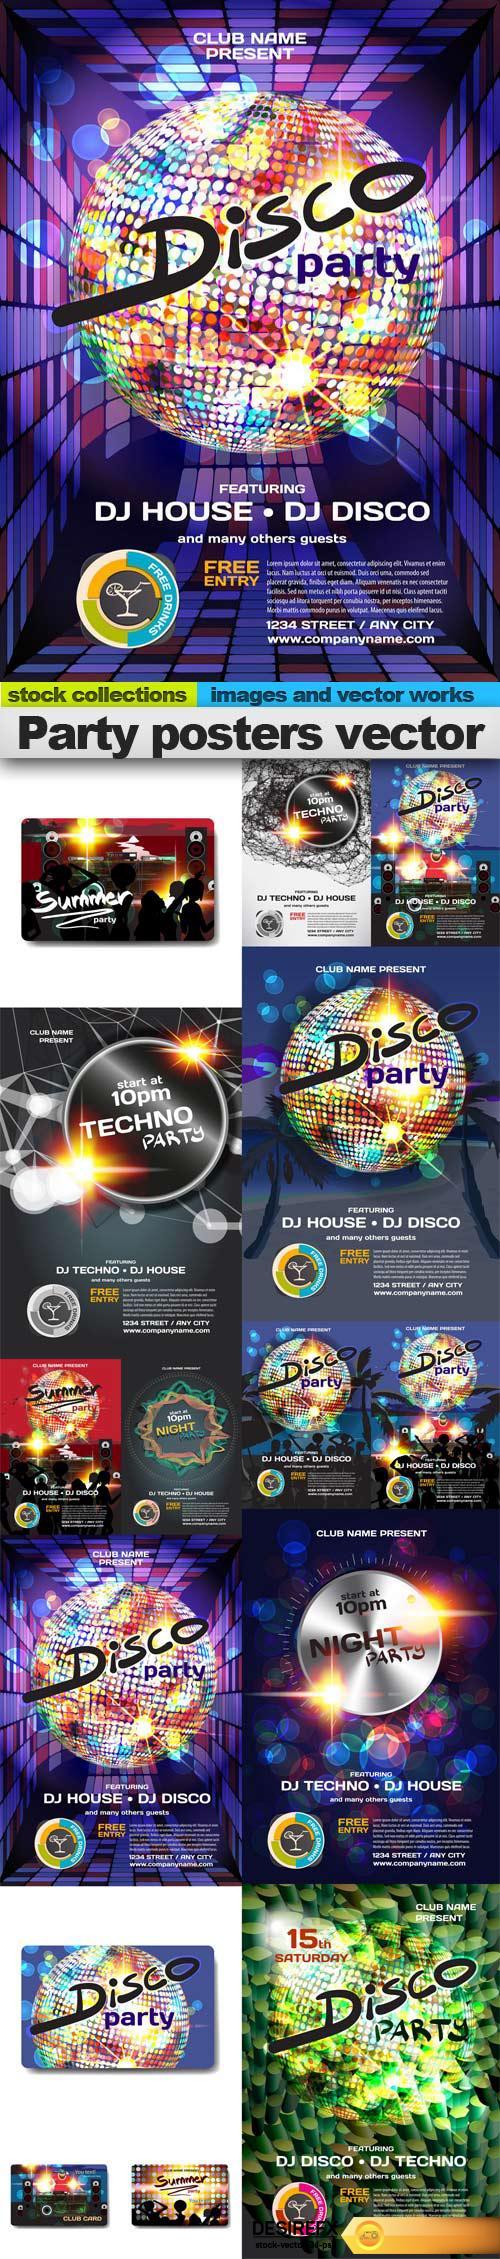 Party posters vector, 15 x EPS